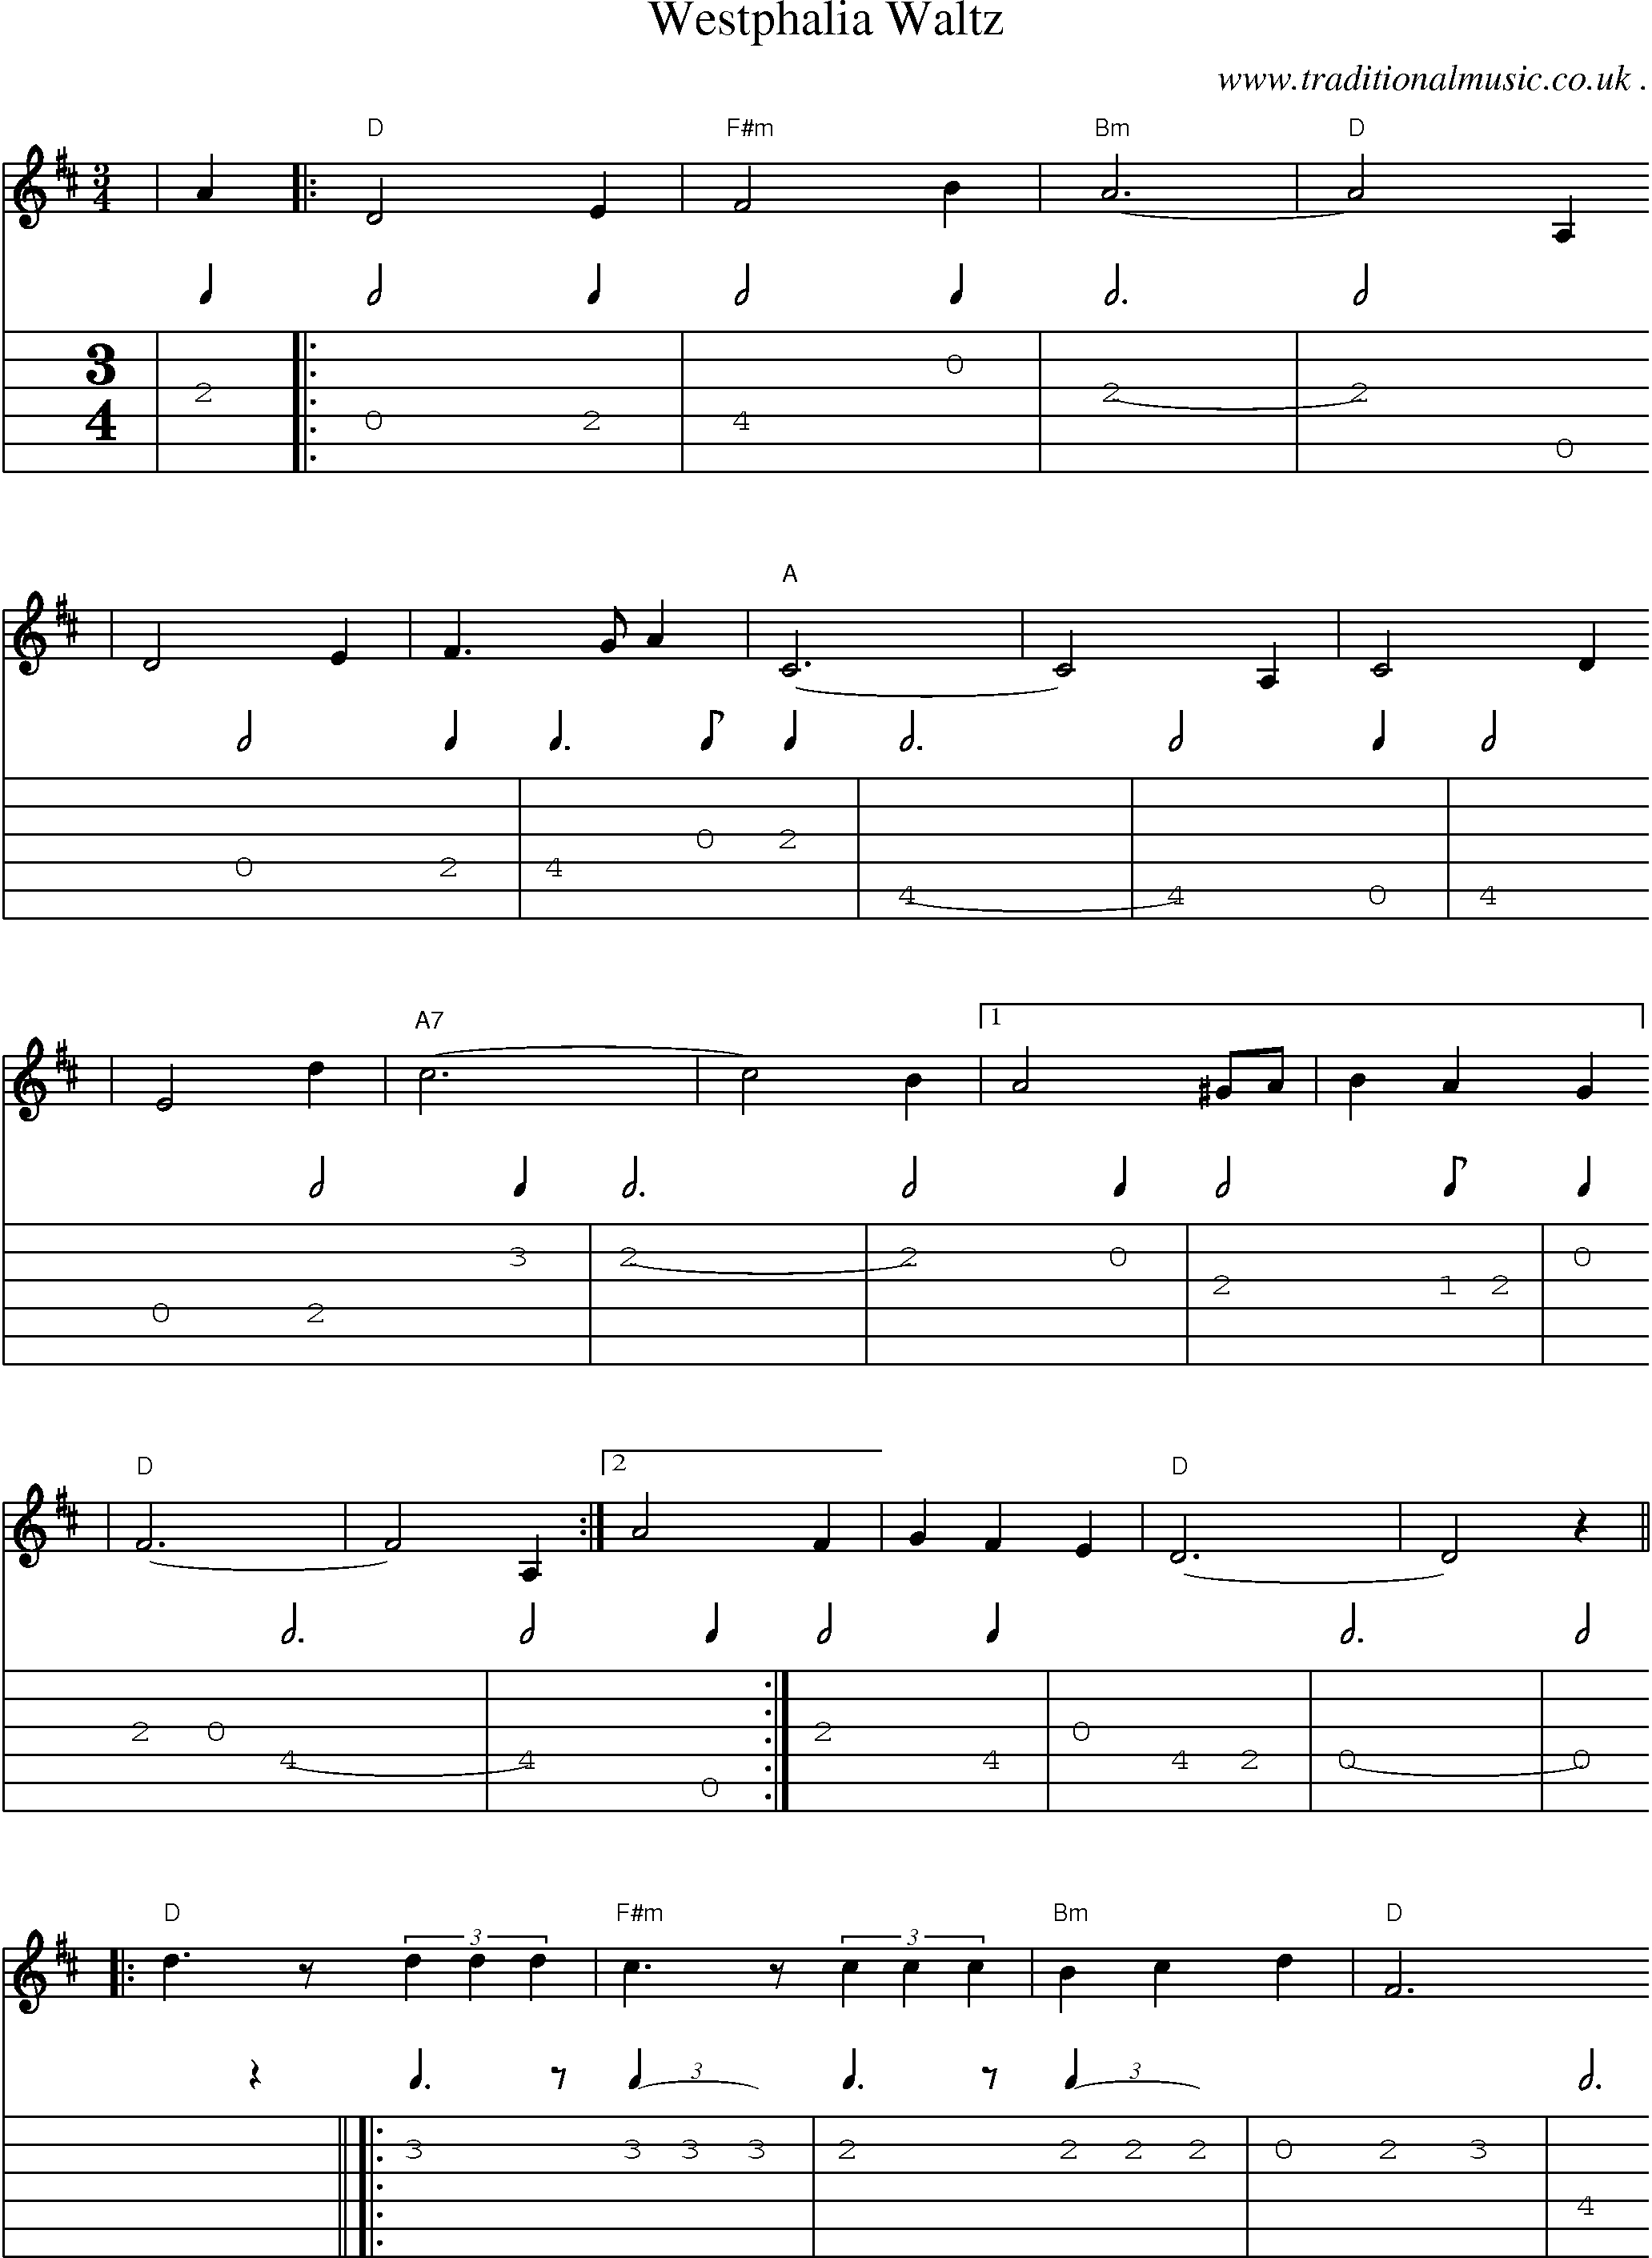 Music Score and Guitar Tabs for Westphalia Waltz